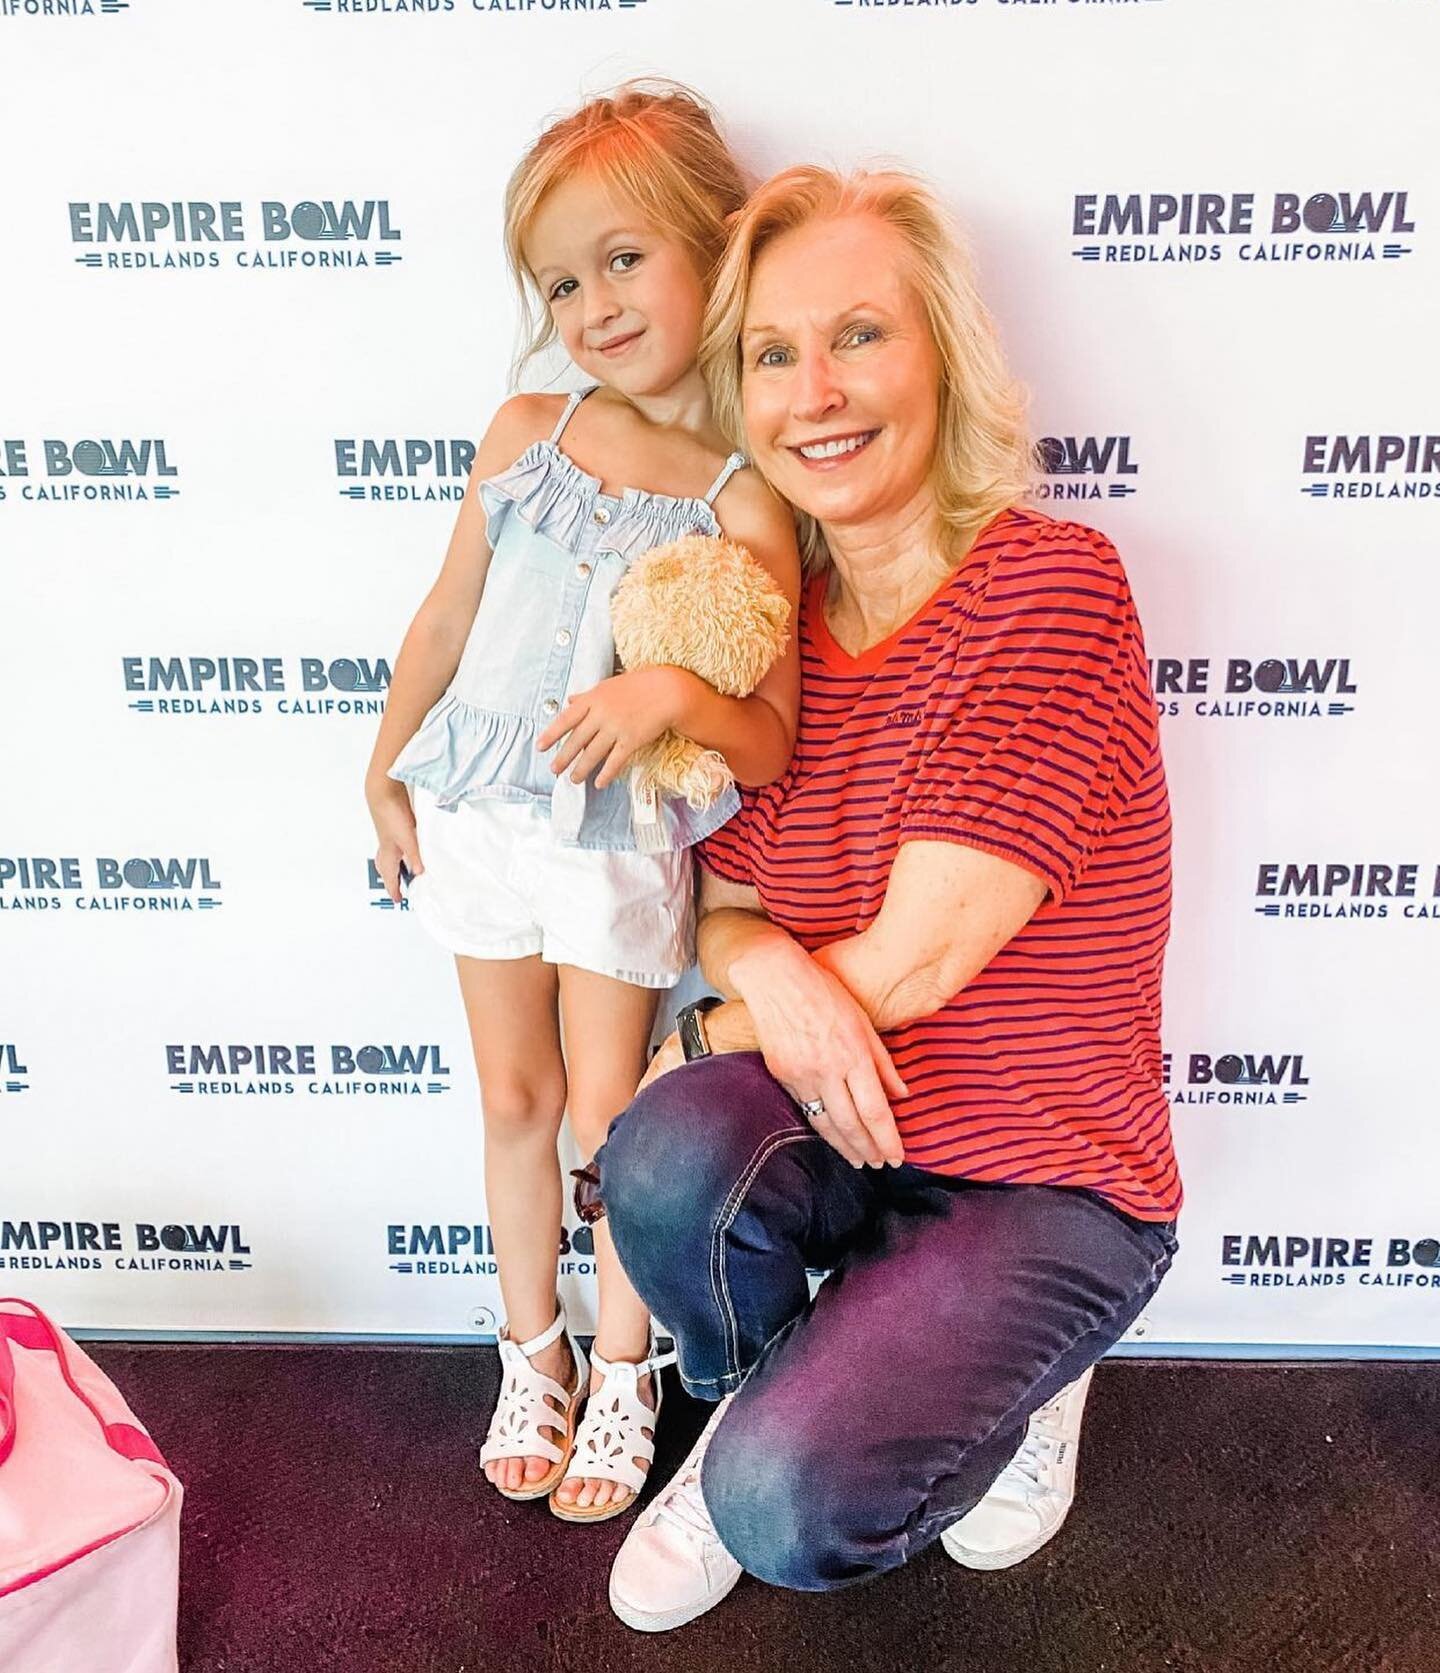 Bowling and bonding with grandma 🤍 Get the kids out of the house EVERY Thursday for family-friendly Cosmic Bowling at 3pm, 5pm, and 7pm🎳 #EmpireBowl 
📸: @tamarairelan